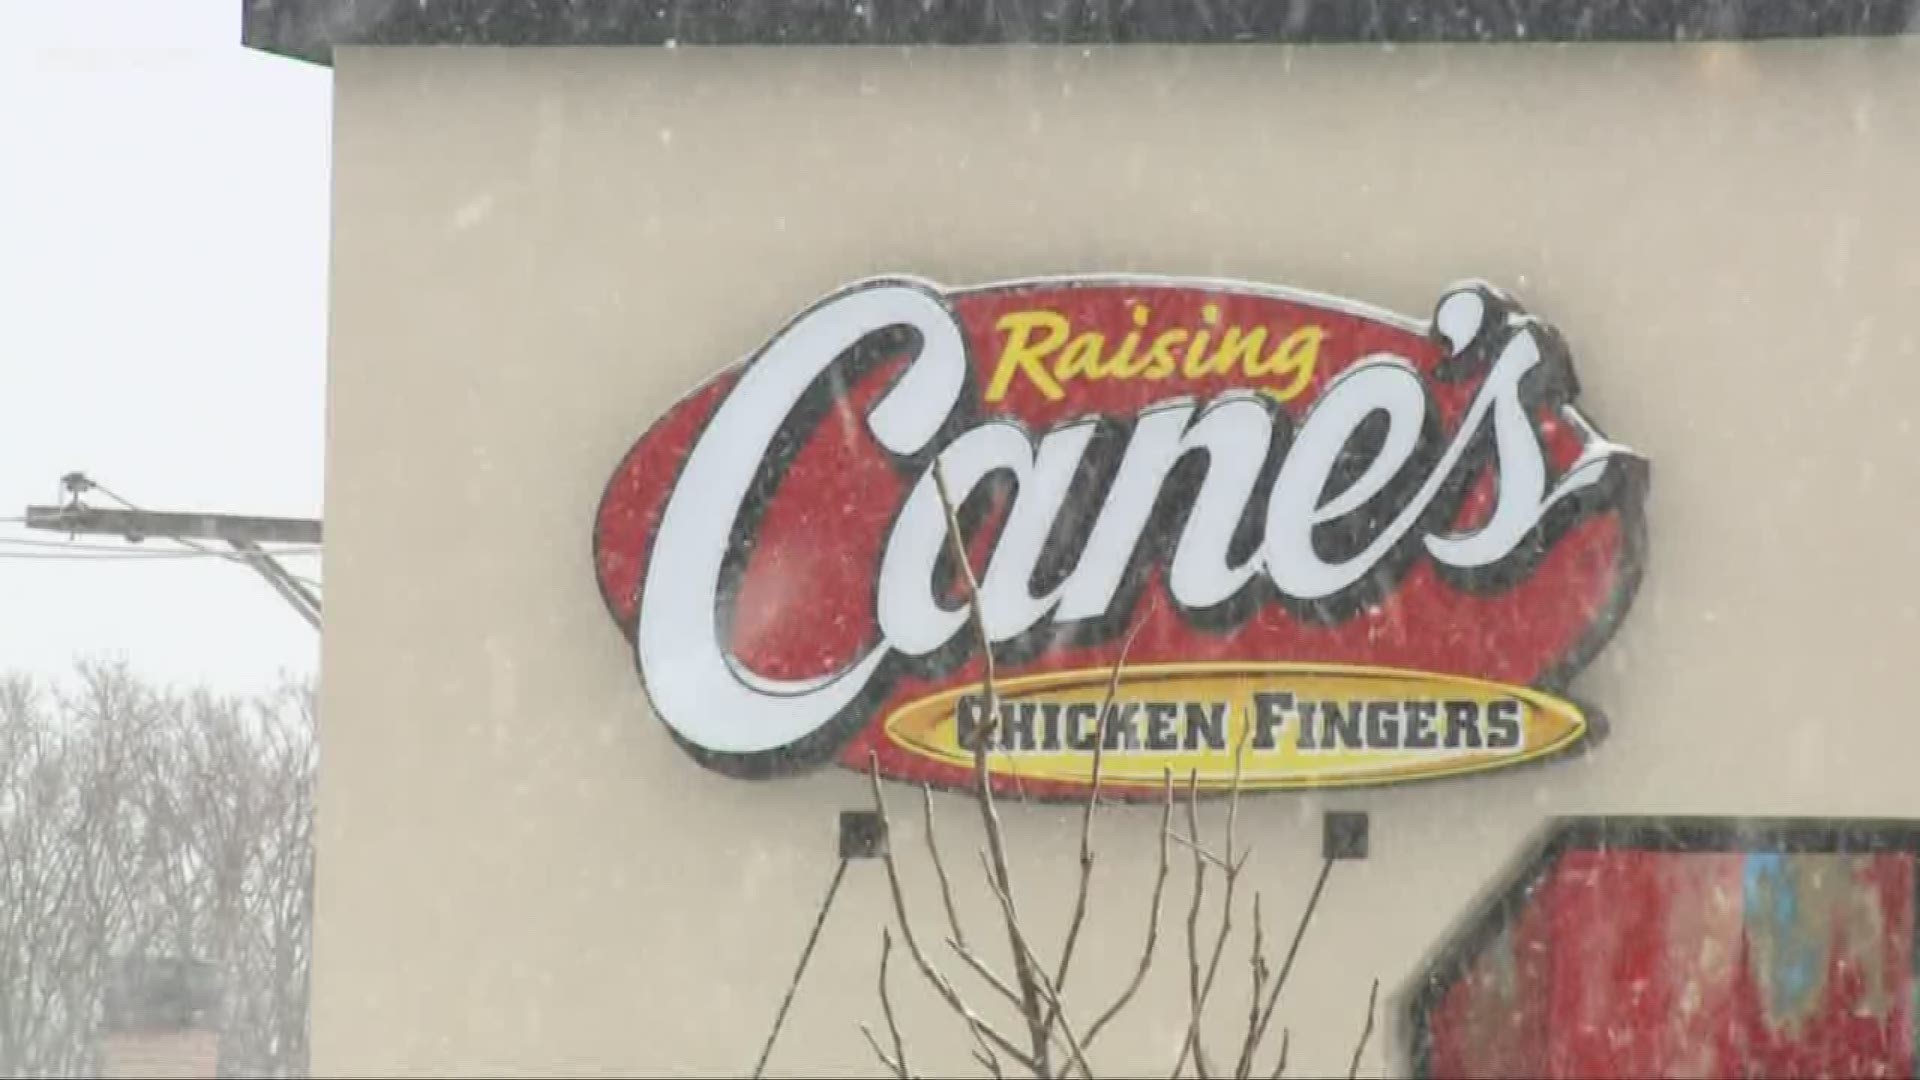 Feb. 11, 2020: The day has finally arrived! Raising Cane’s opens its newest Northeast Ohio location in Rocky River today.